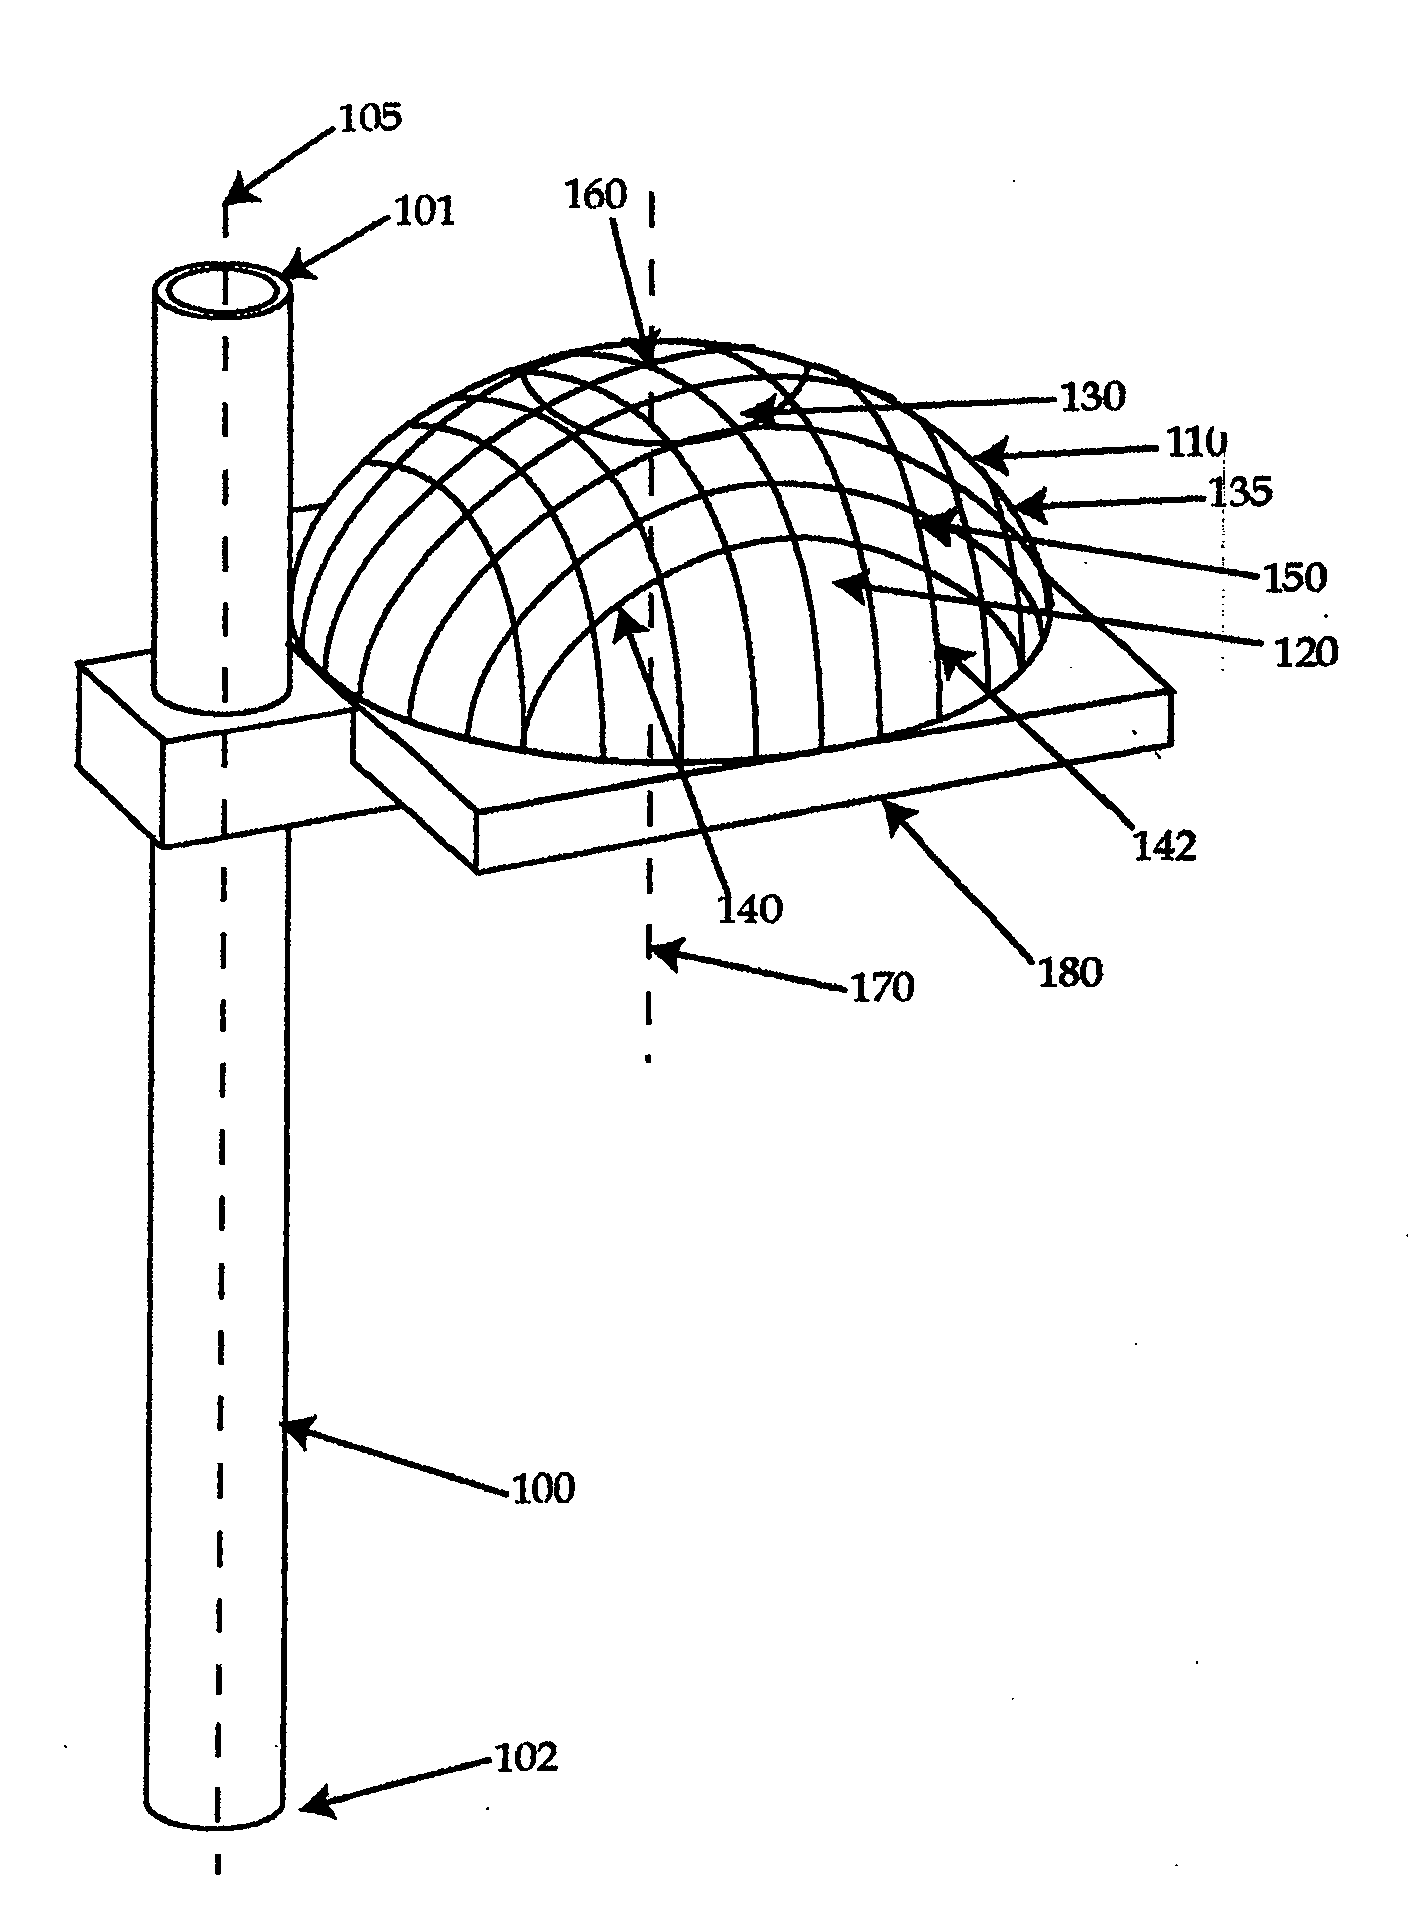 Gravity dependent pedicle screw tap hole guide and data processing device